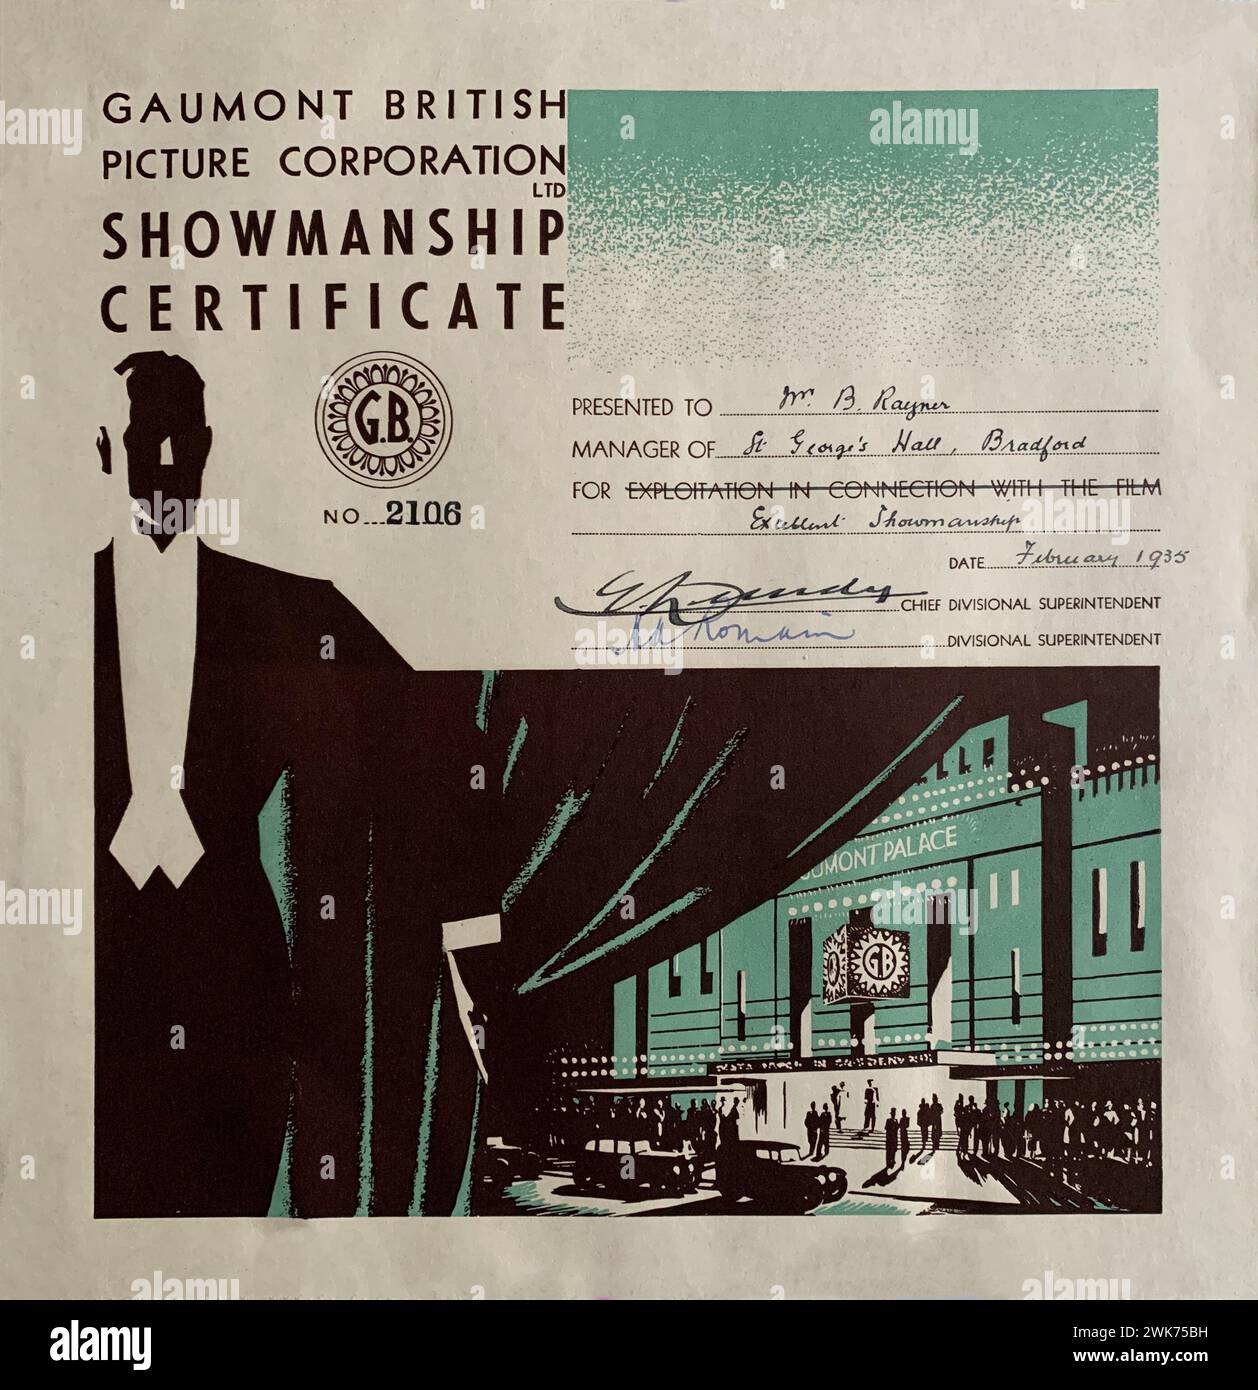 GAUMONT BRITISH PICTURE CORPORATION SHOWMANSHIP CERTIFICATE presented in February 1935 to Mr. B. Raynes Manager of St. George's Hall, Bradford for Excellent Showmanship Stock Photo